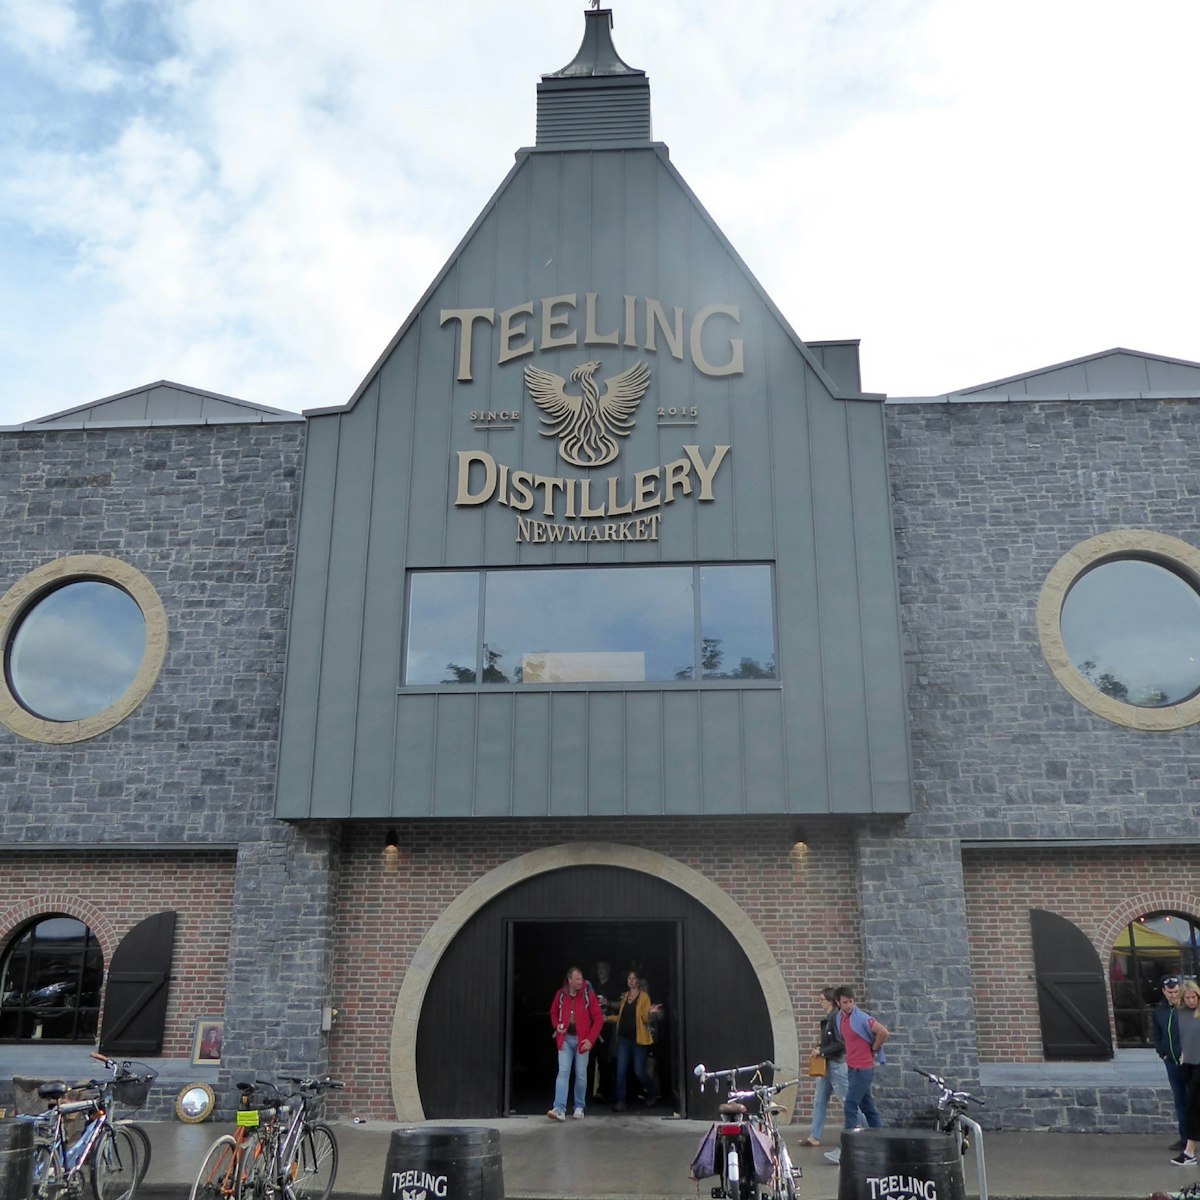 The entrance to Teeling Distillery